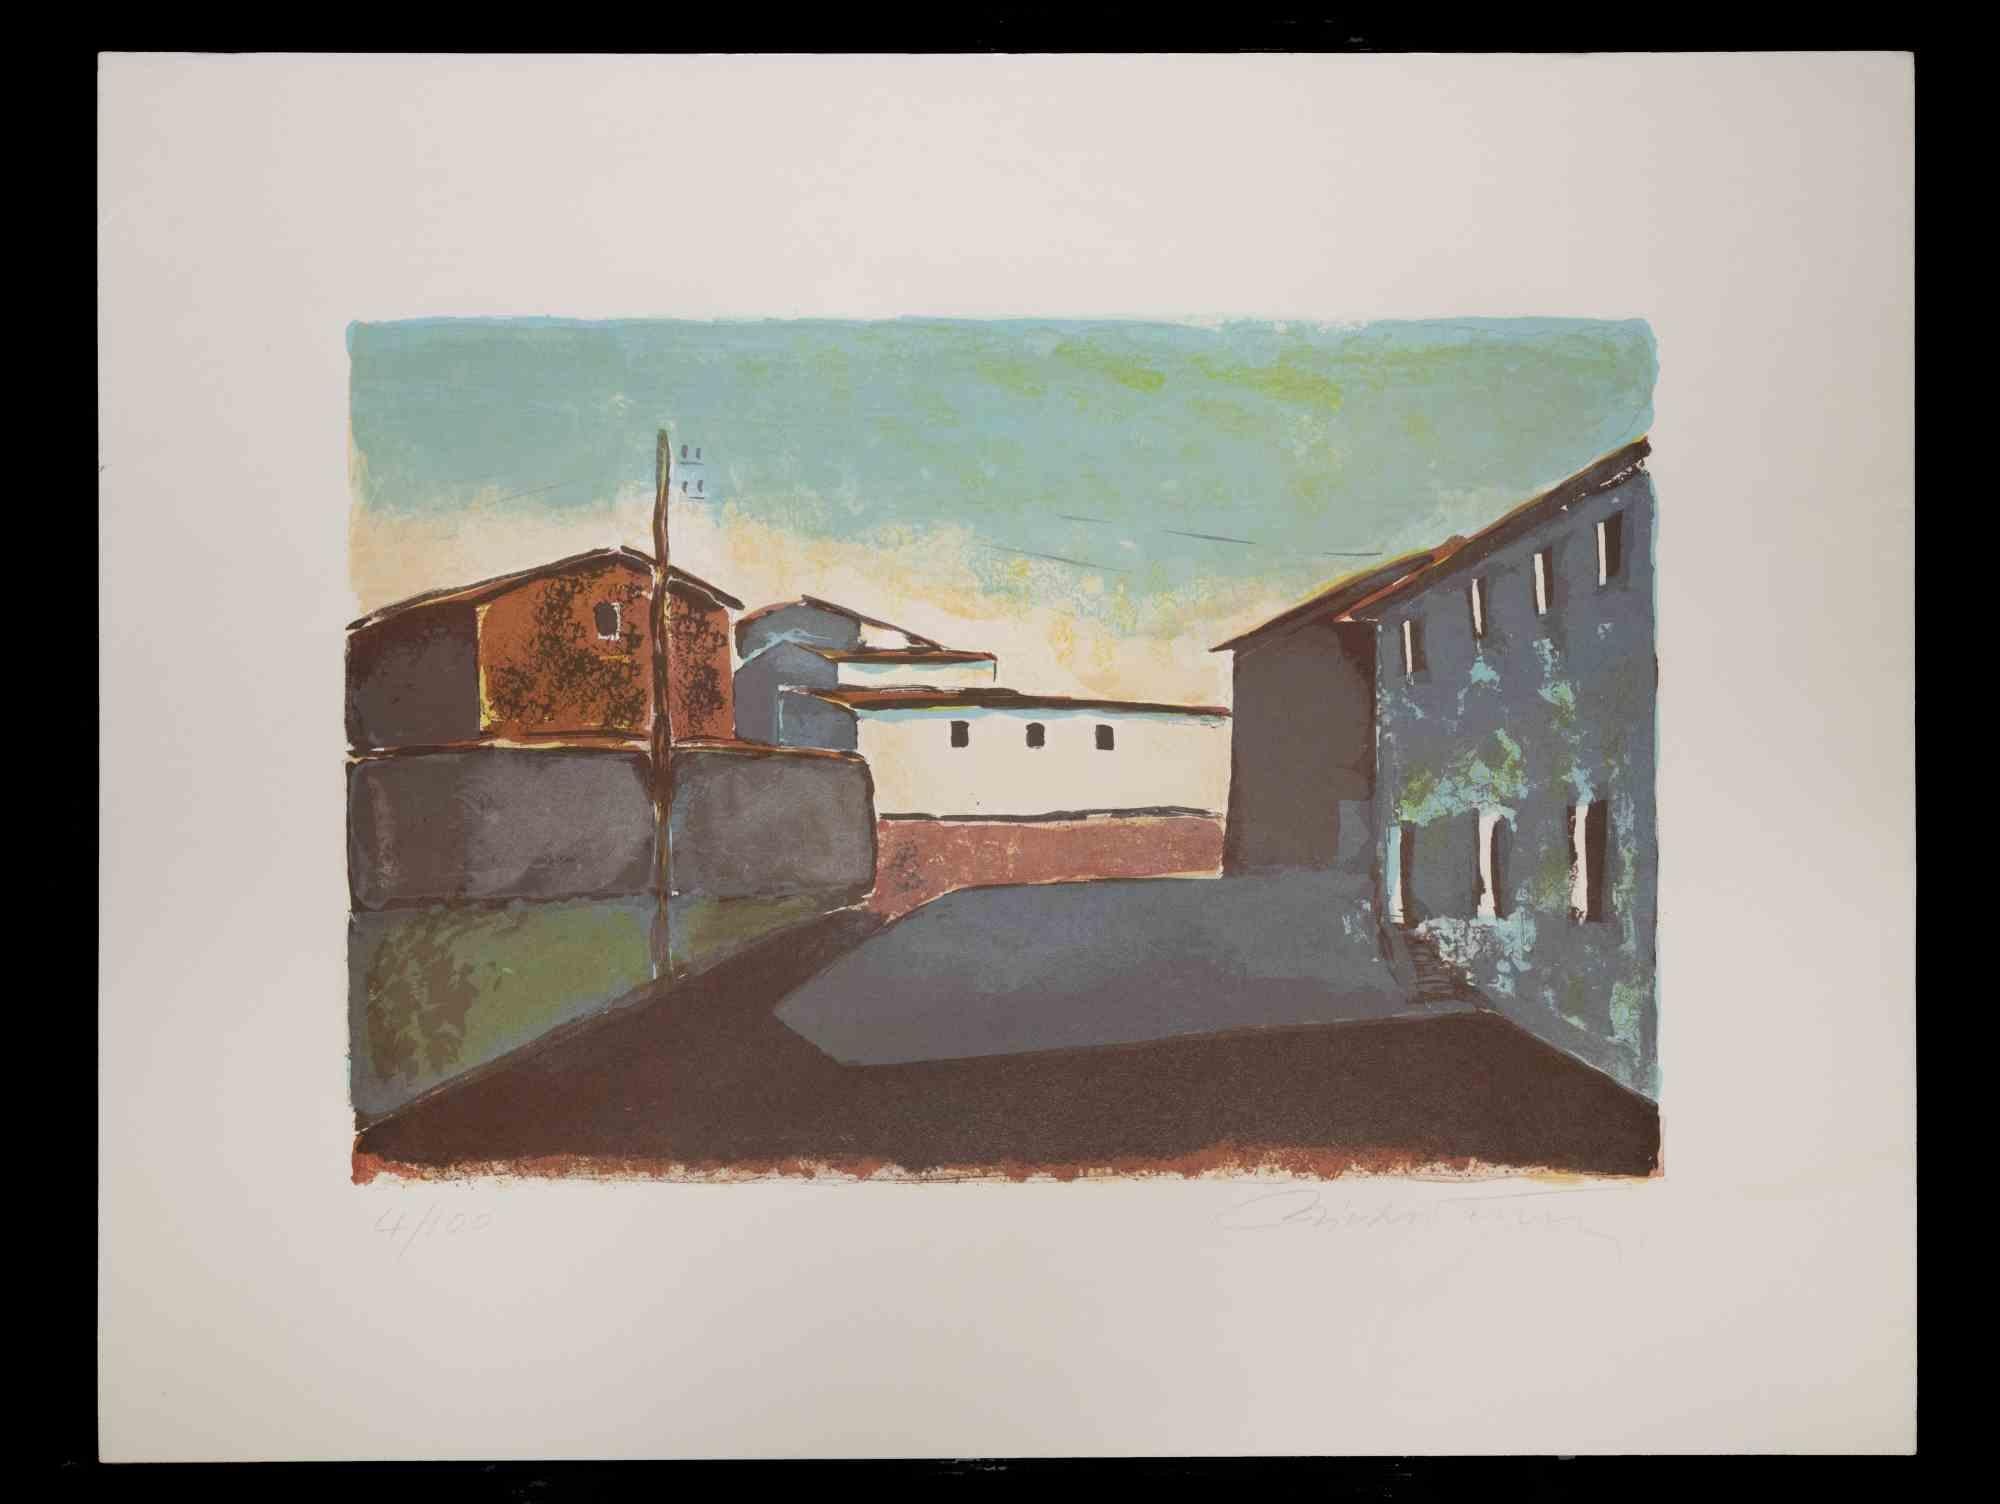 Landscape is an original artwork realized in the 1970s by Pietro Vanni.

Mixed colored lithograph

Hand signed and numbered. Edition of 100 prints.